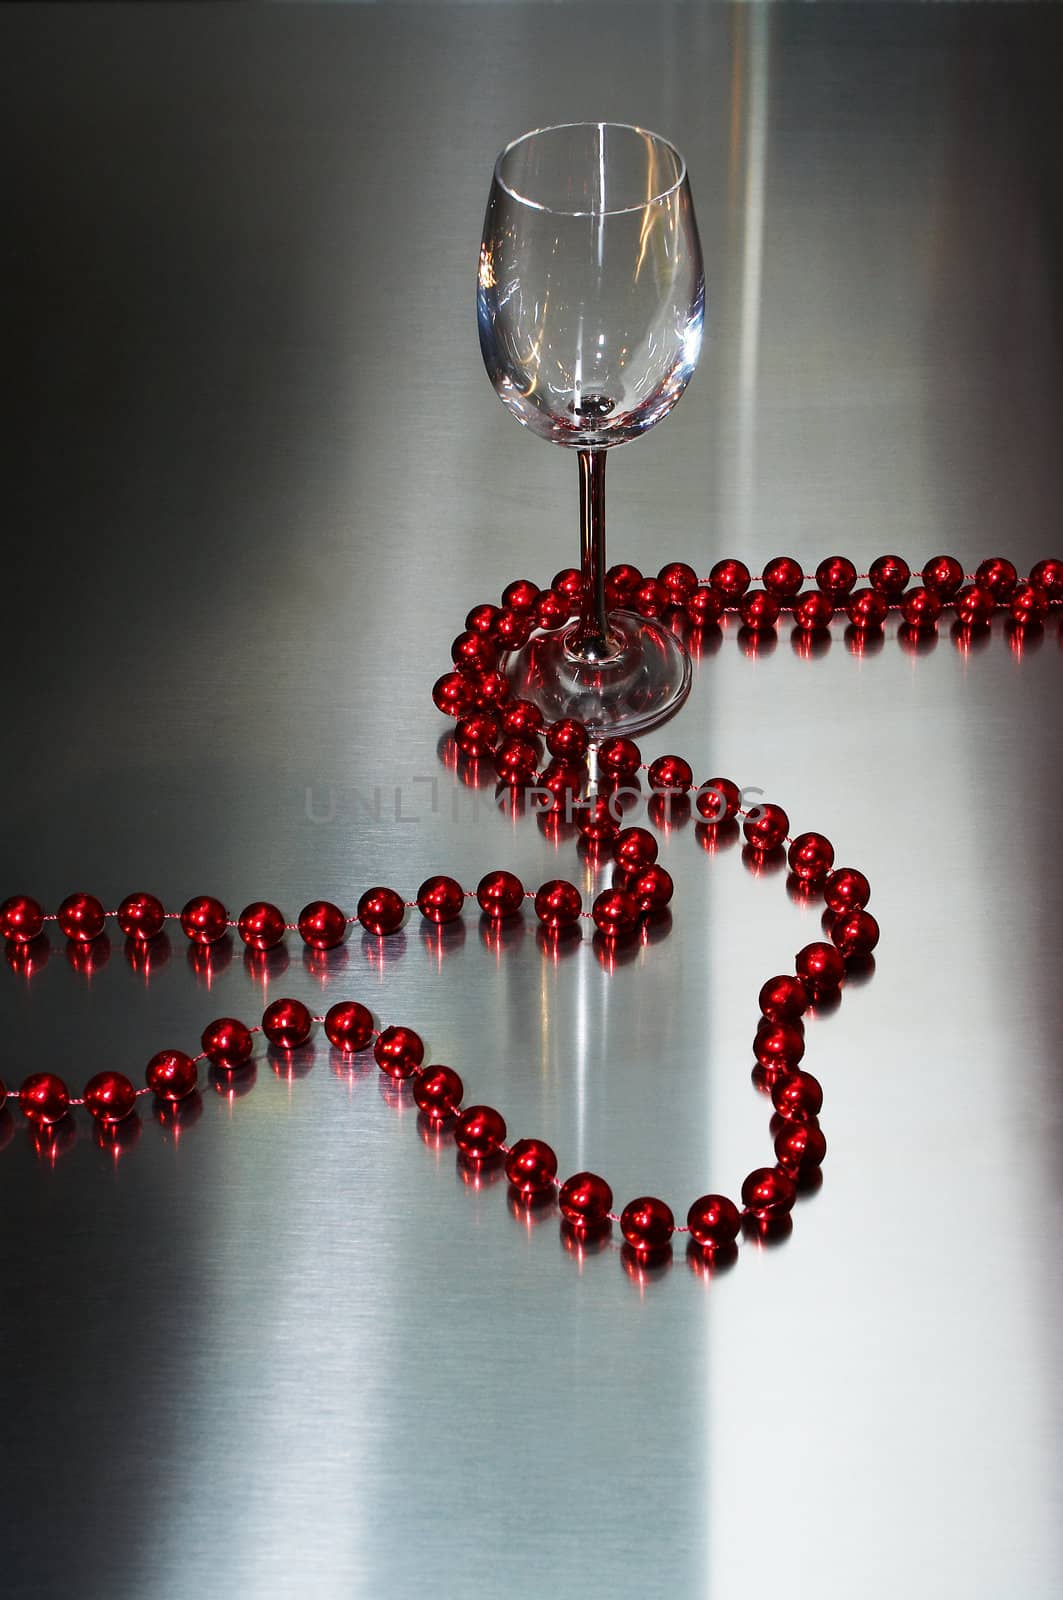 wine-glass and beads by terex